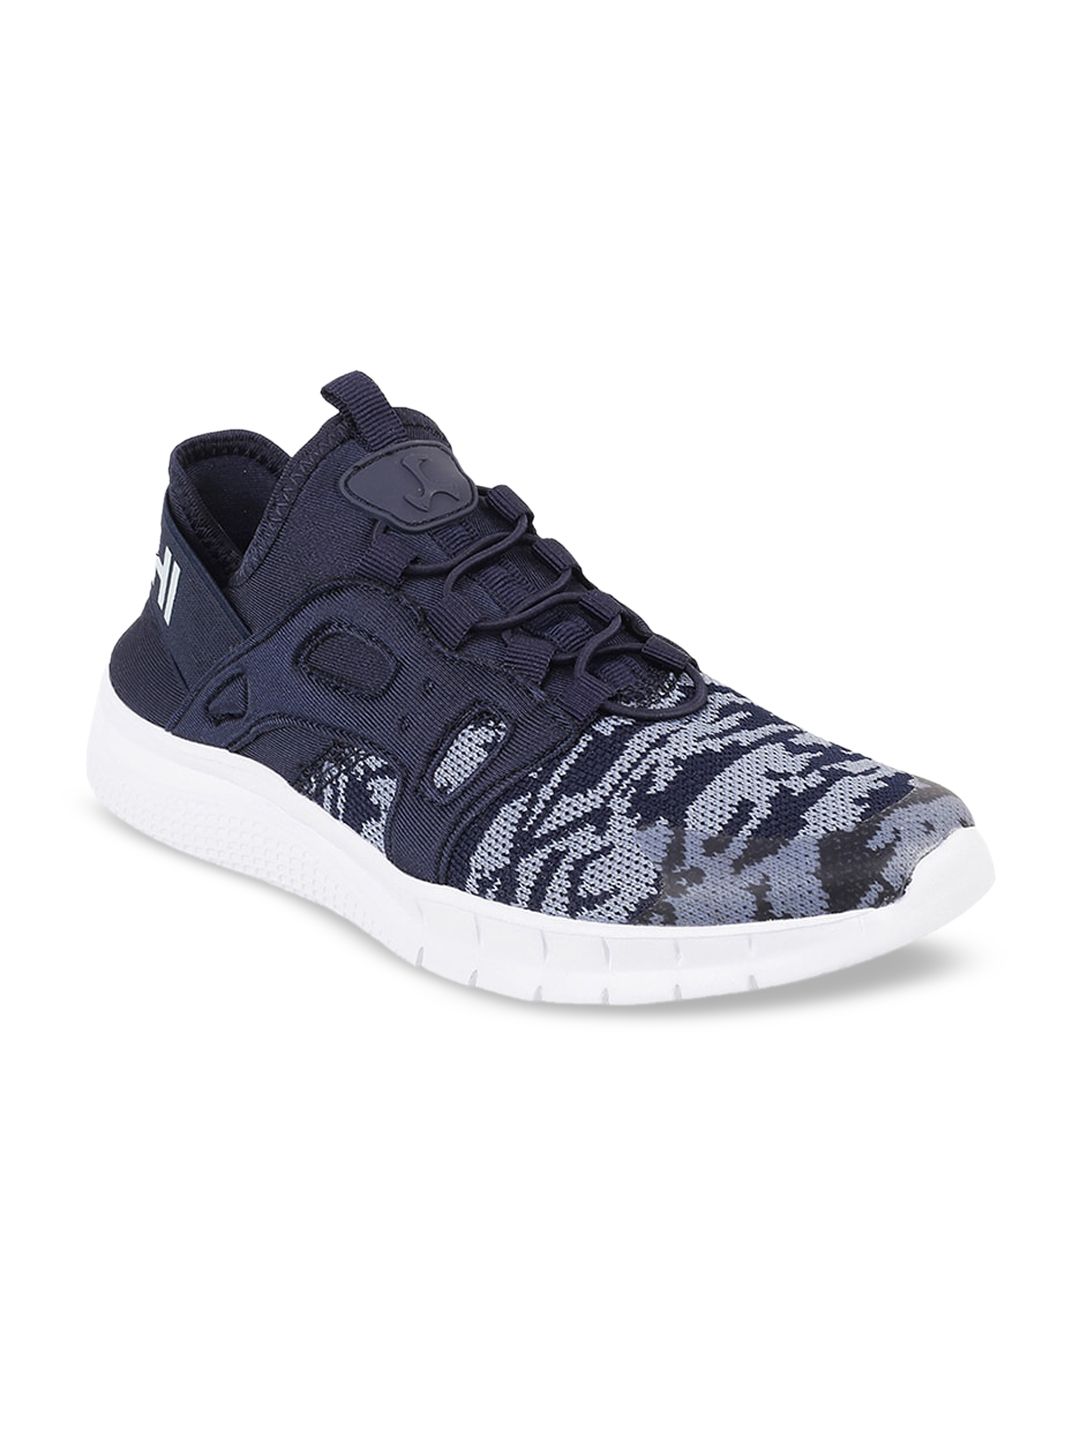 Mochi Women Navy Blue Mid-Top Sneakers Price in India